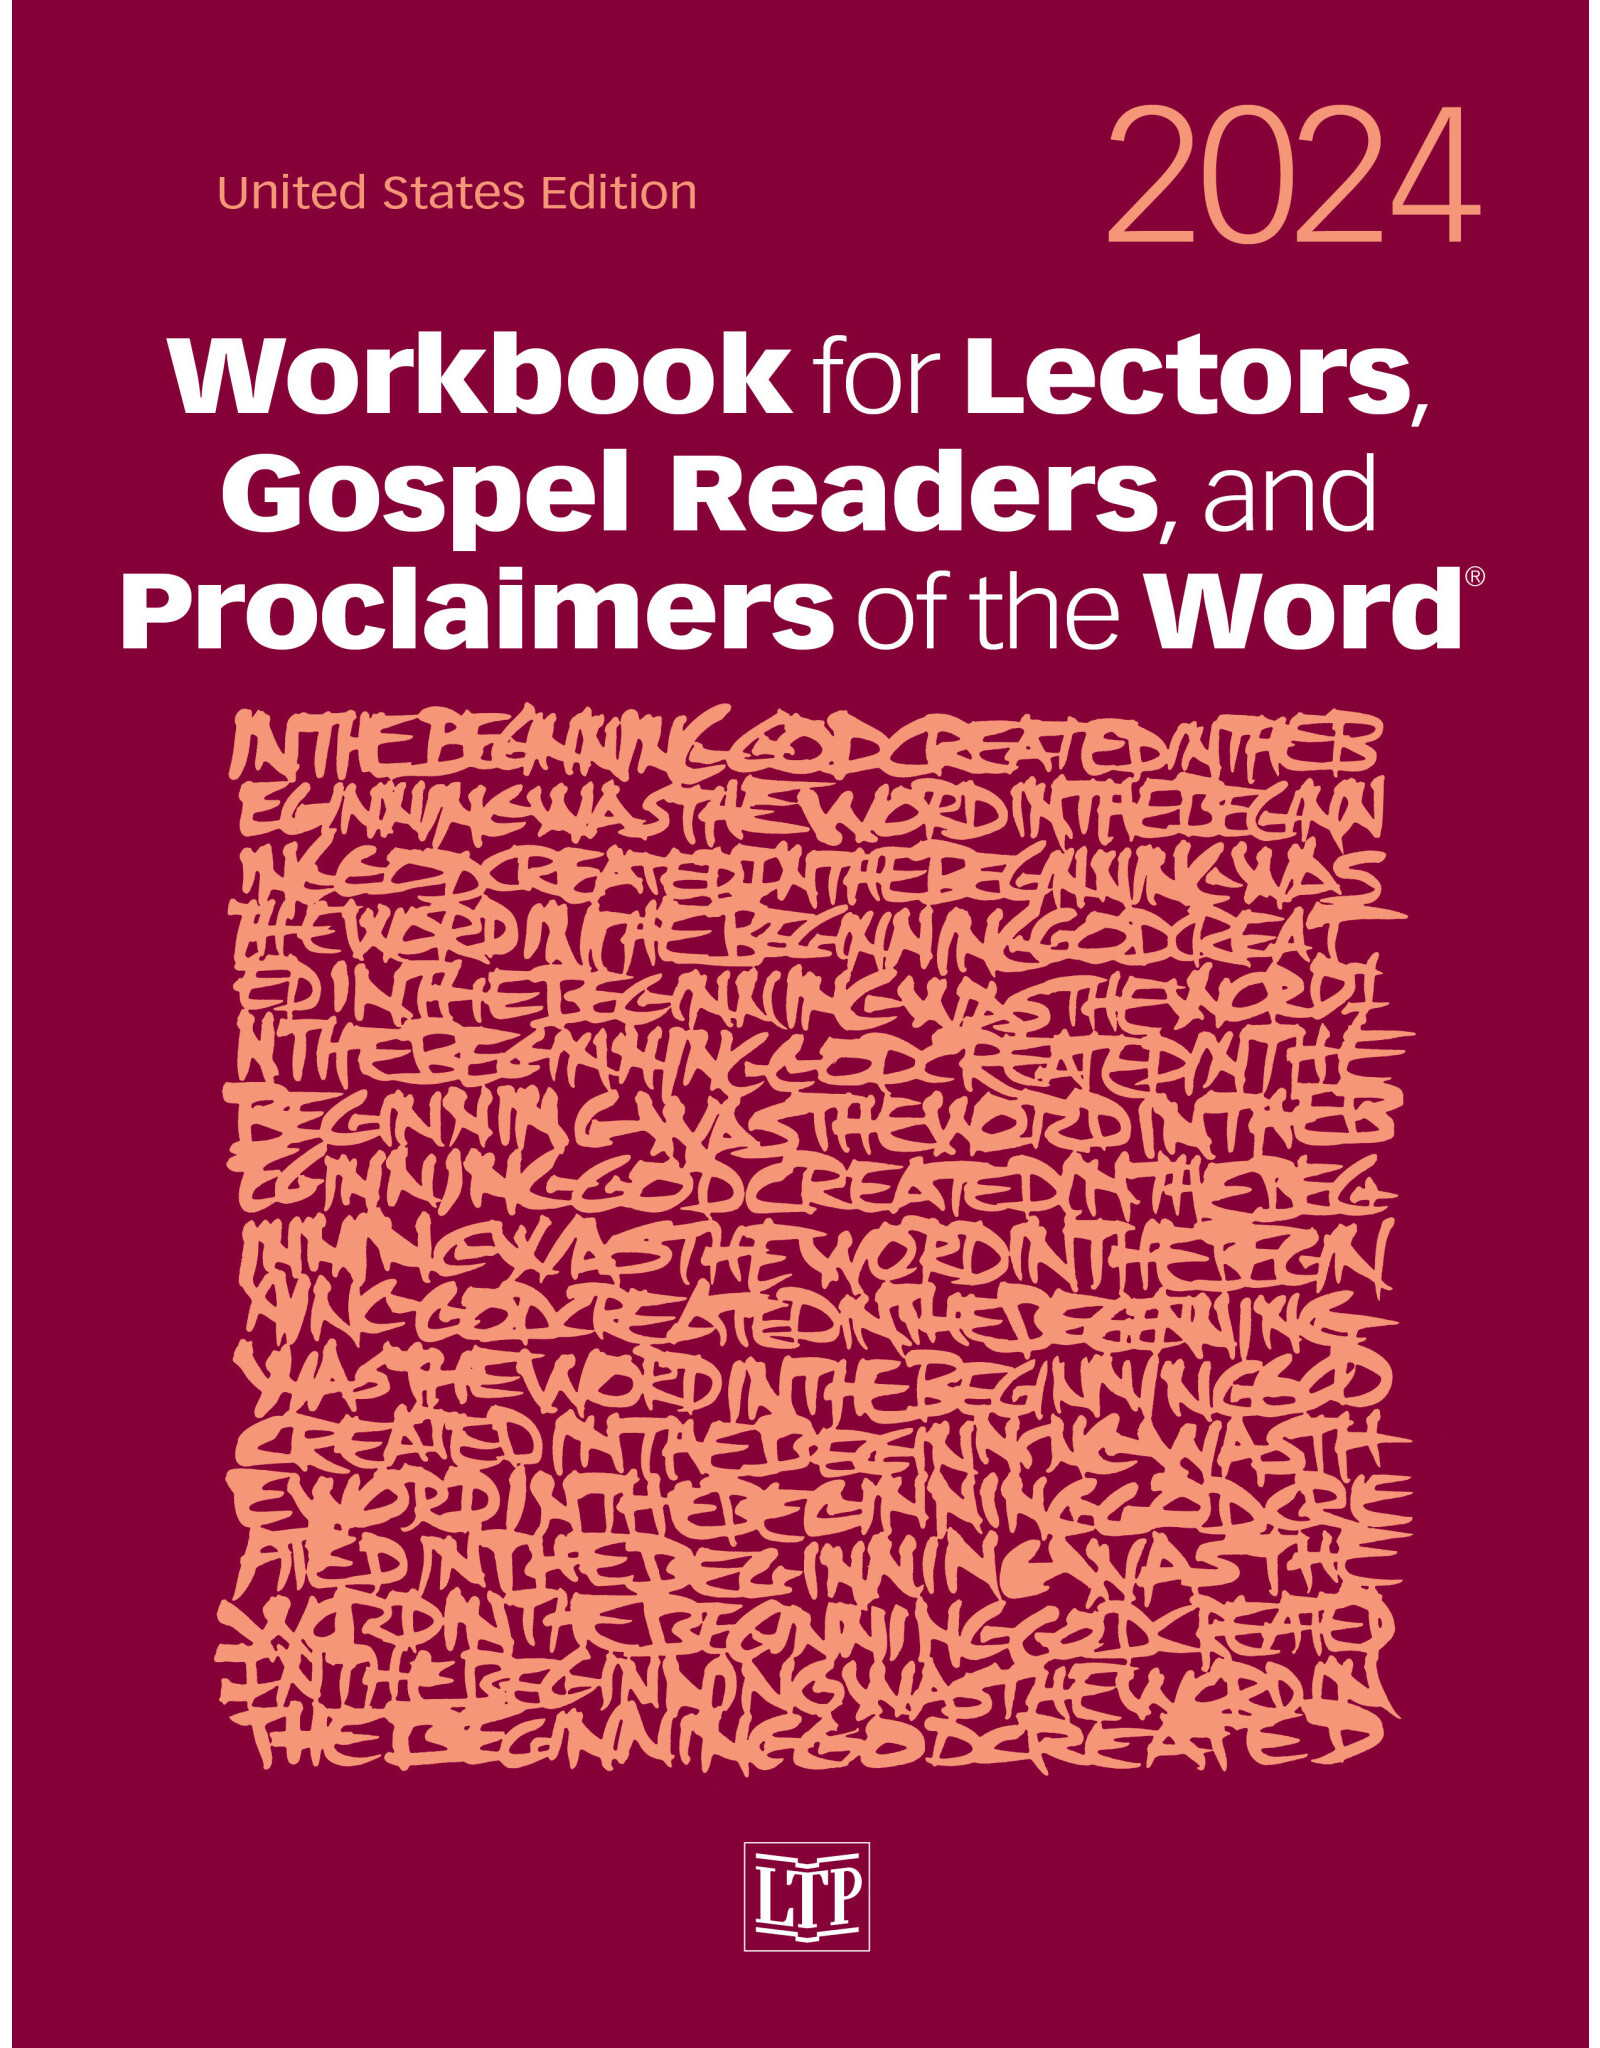 LTP (Liturgy Training Publications) 2024 Workbook for Lectors, Gospel Readers, & Proclaimers of the Word